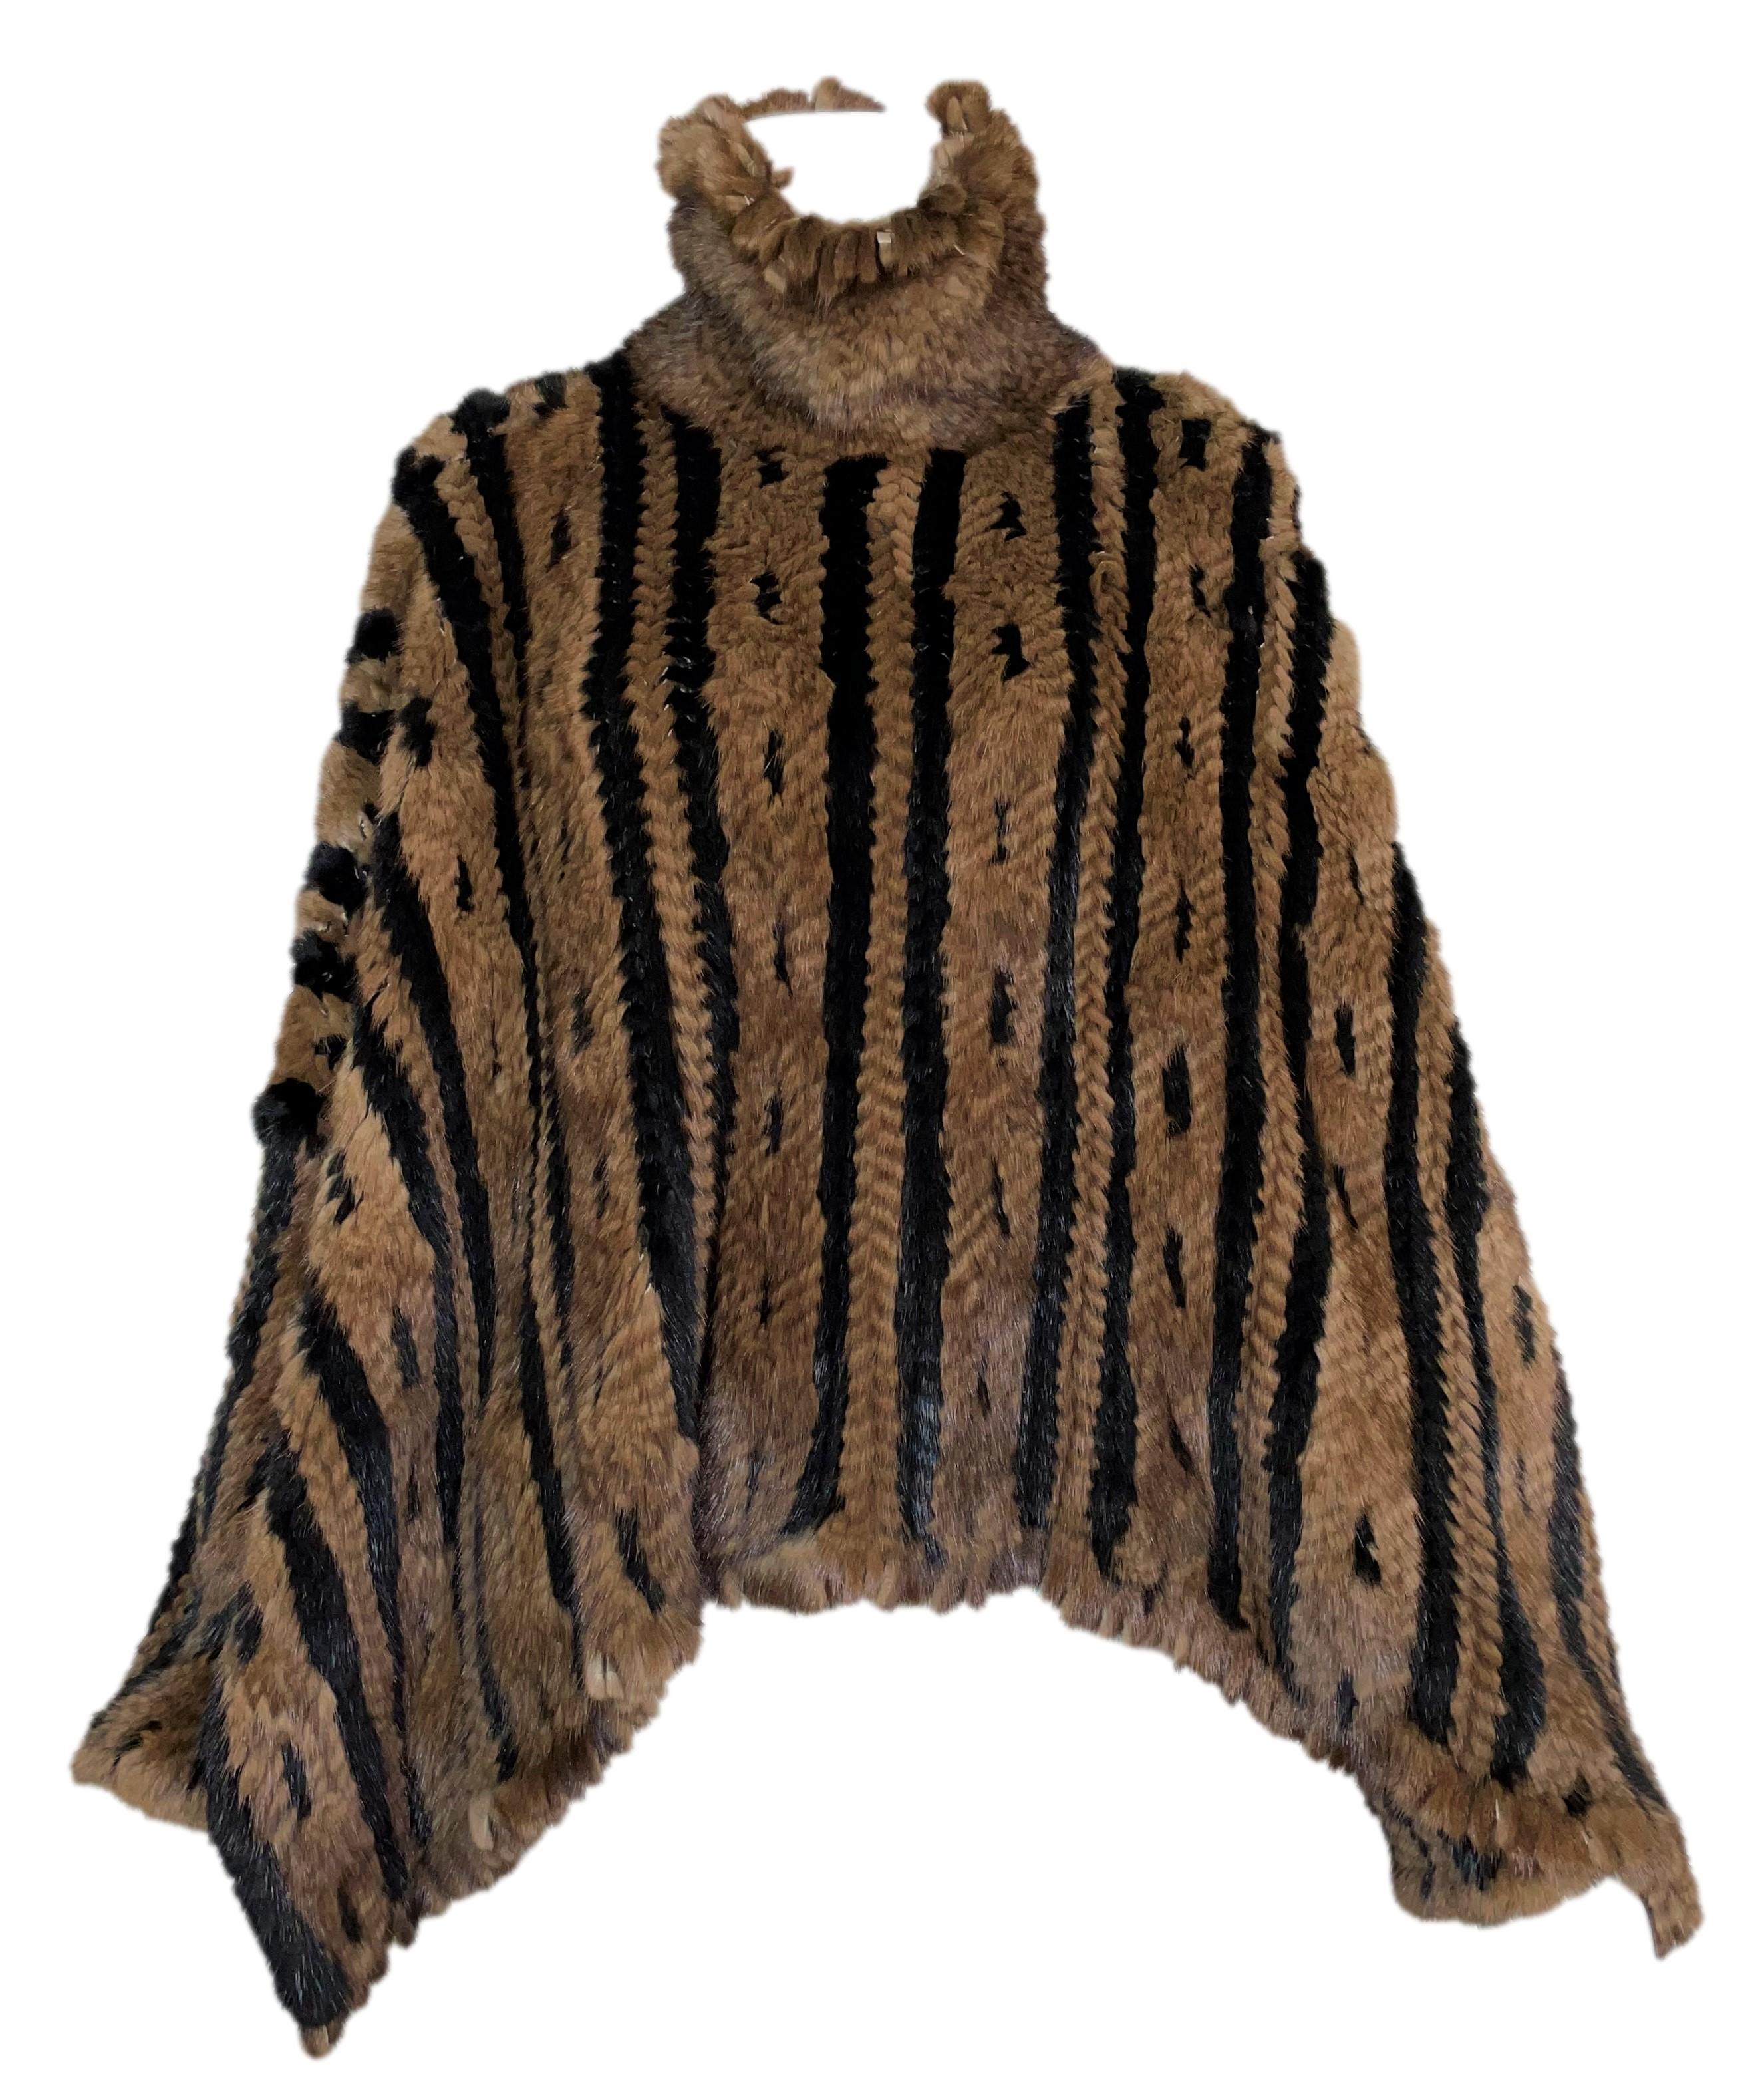 DESIGNER: F/W 2000 Christian Dior by John Galliano
CONDITION: Excellent
FABRIC: Mink fur
COUNTRY: France
SIZE: 40 but it is a poncho so really fits like O/S
MEASUREMENTS; provided as a courtesy only- not a guarantee of fit:
37